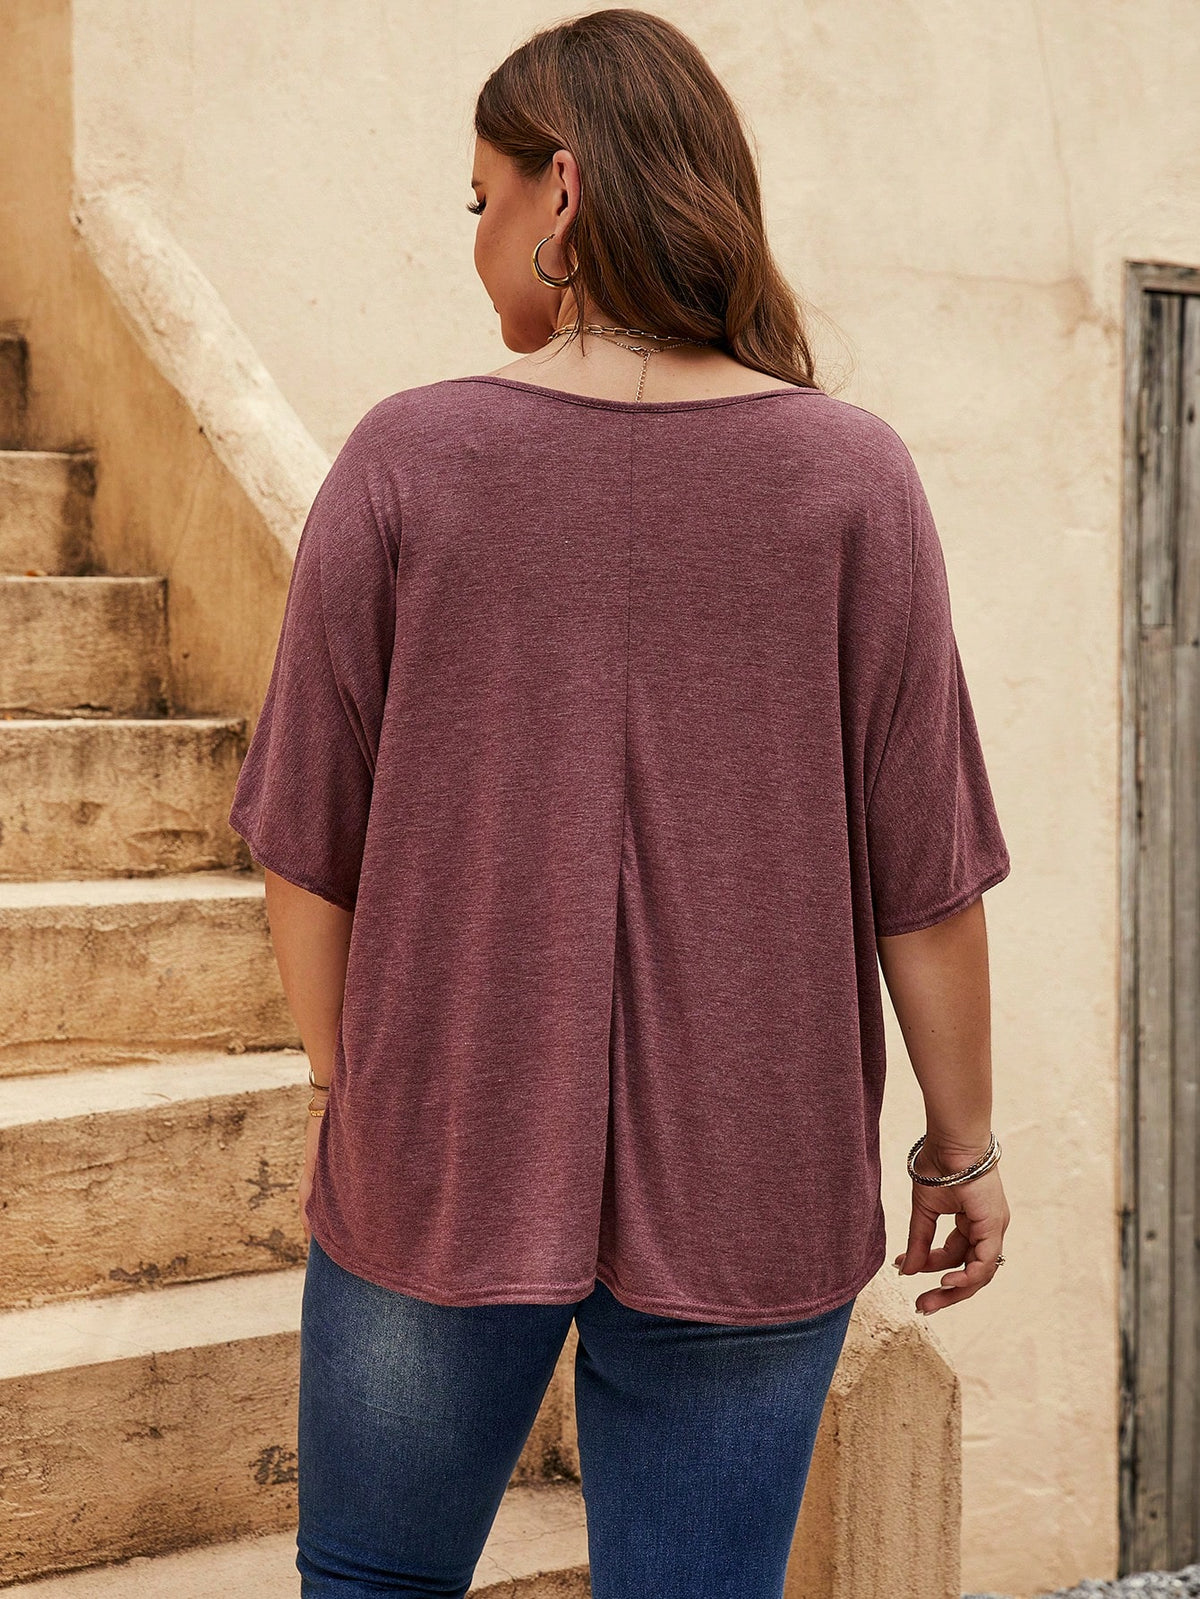 Plus Women's Tee with Batwing Sleeve